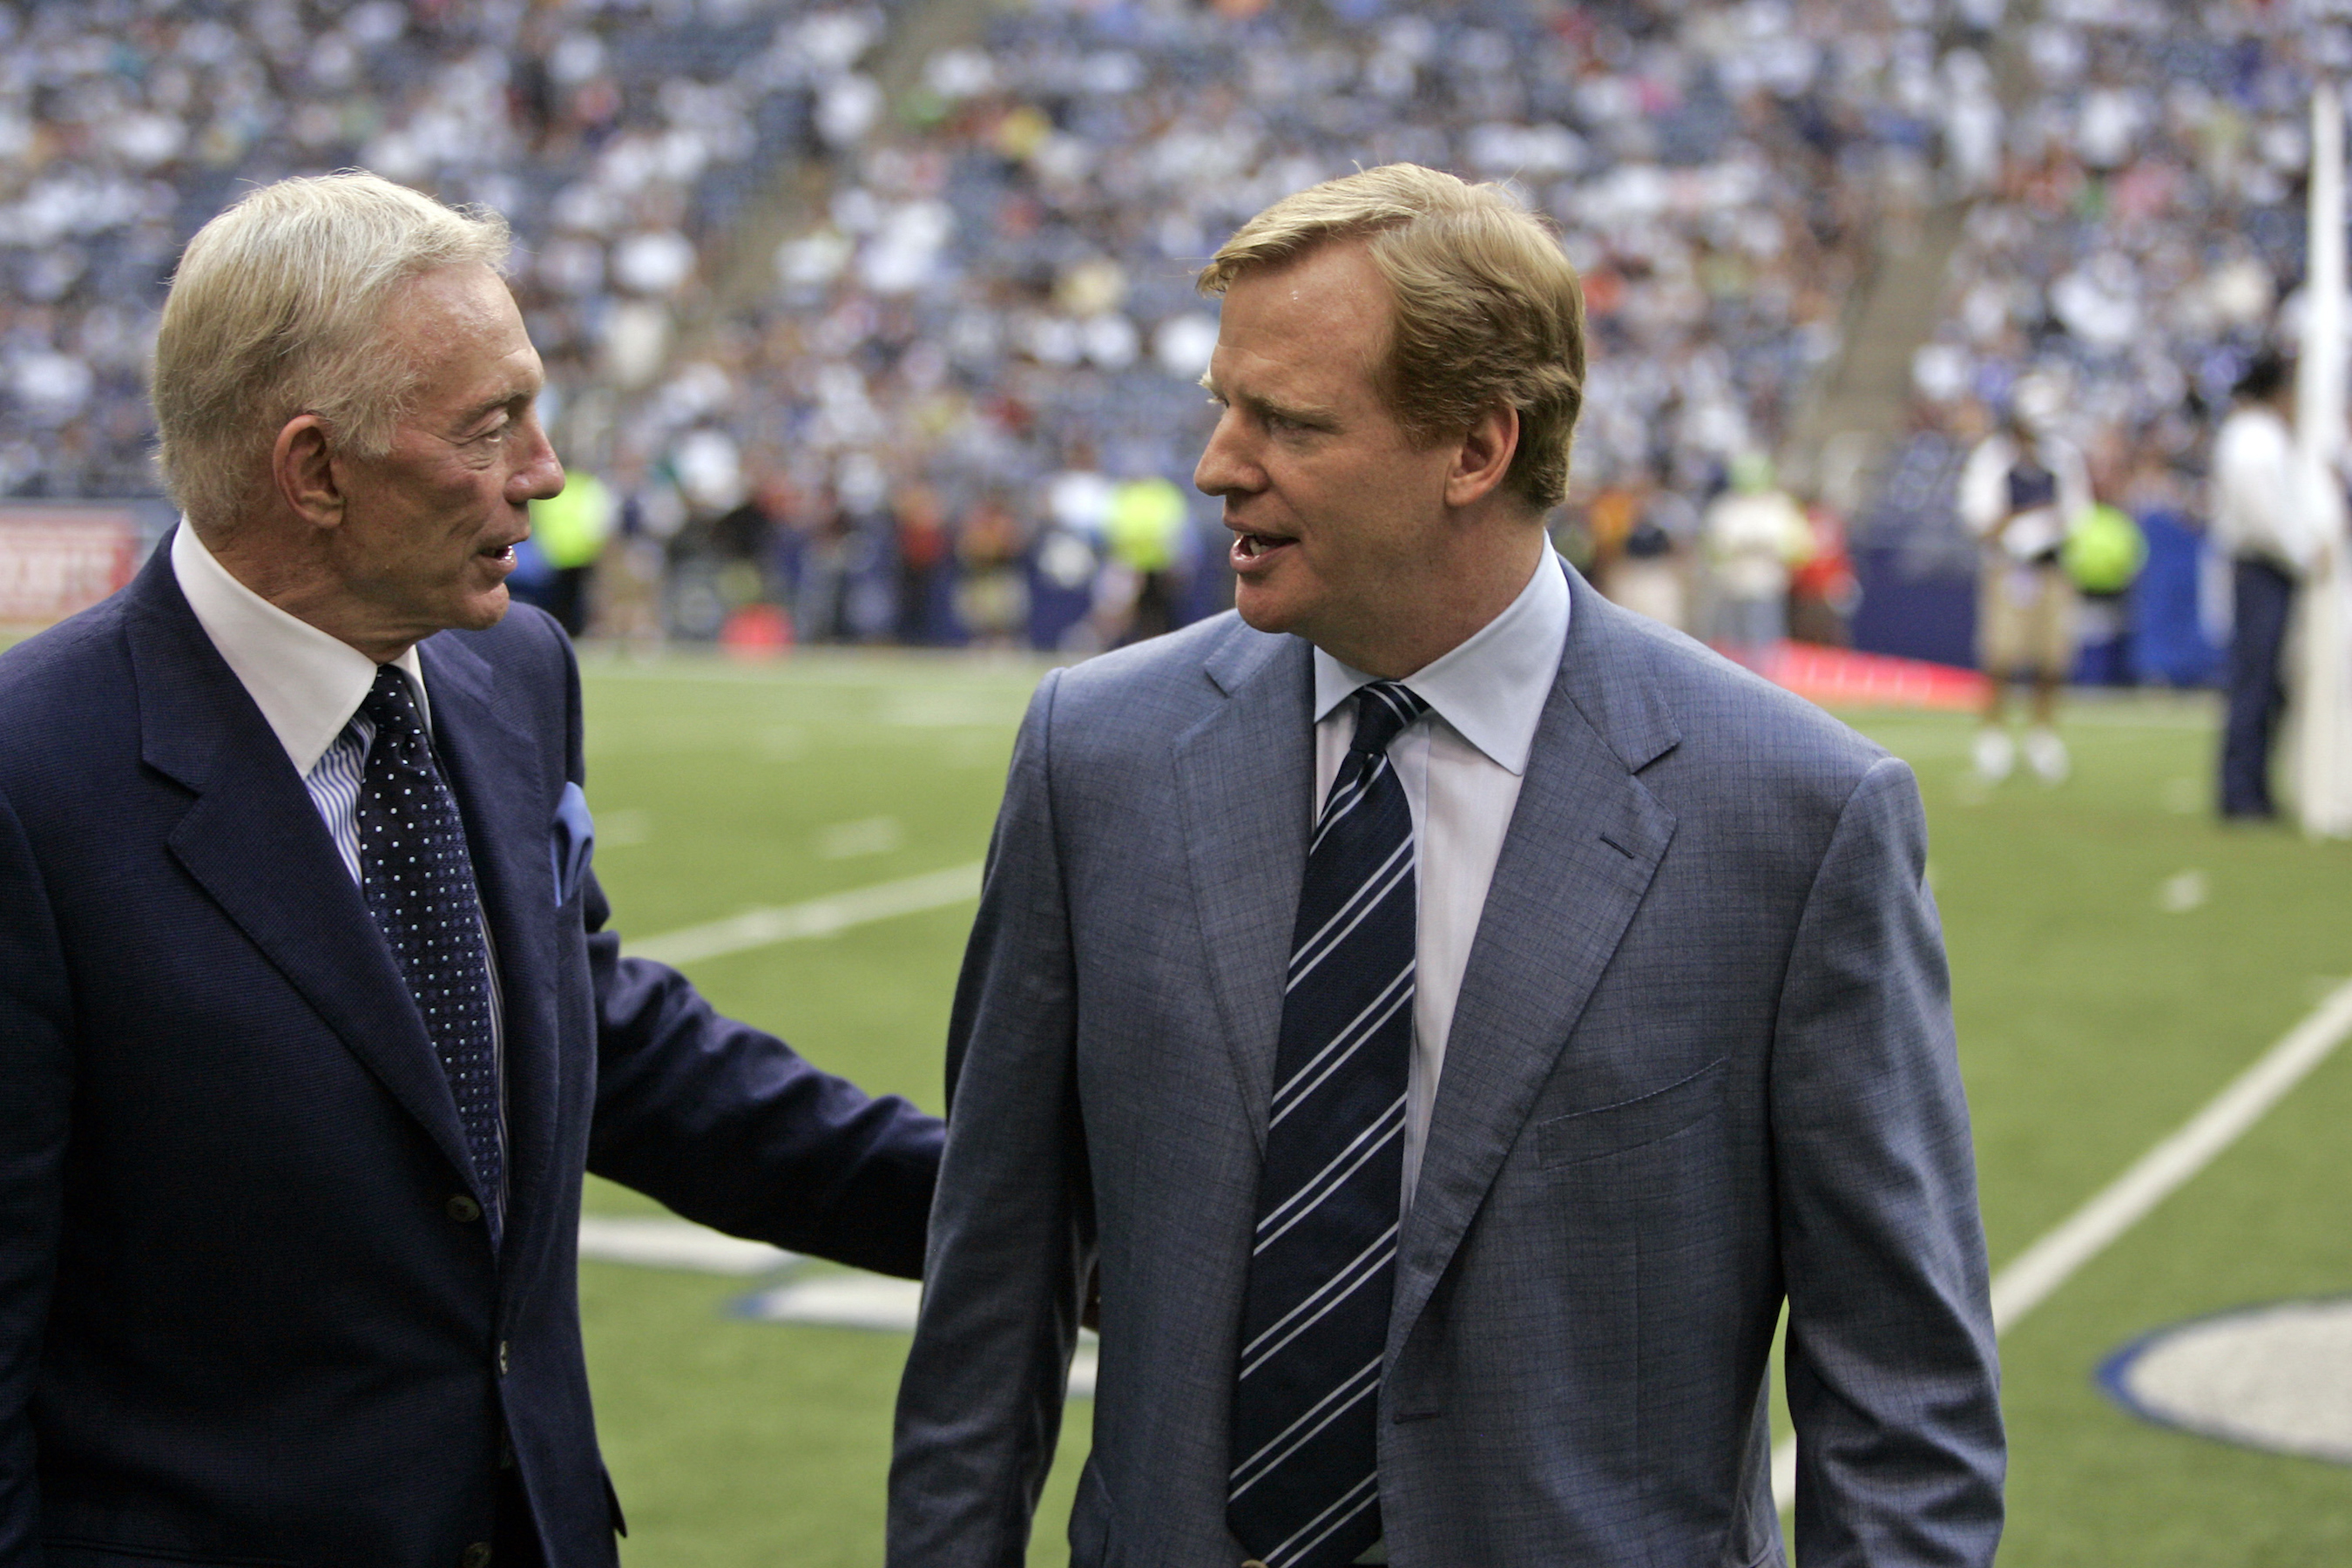 NFL commissioner Roger Goodell (right) visits with owner Jerry Jones (left) of the Dallas Cowboys during the Cowboys 45-35 win over the New York Giants at Texas Stadium in Irving, Texas. (Photo by James D. Smith /Icon SMI/Icon Sport Media via Getty Images)